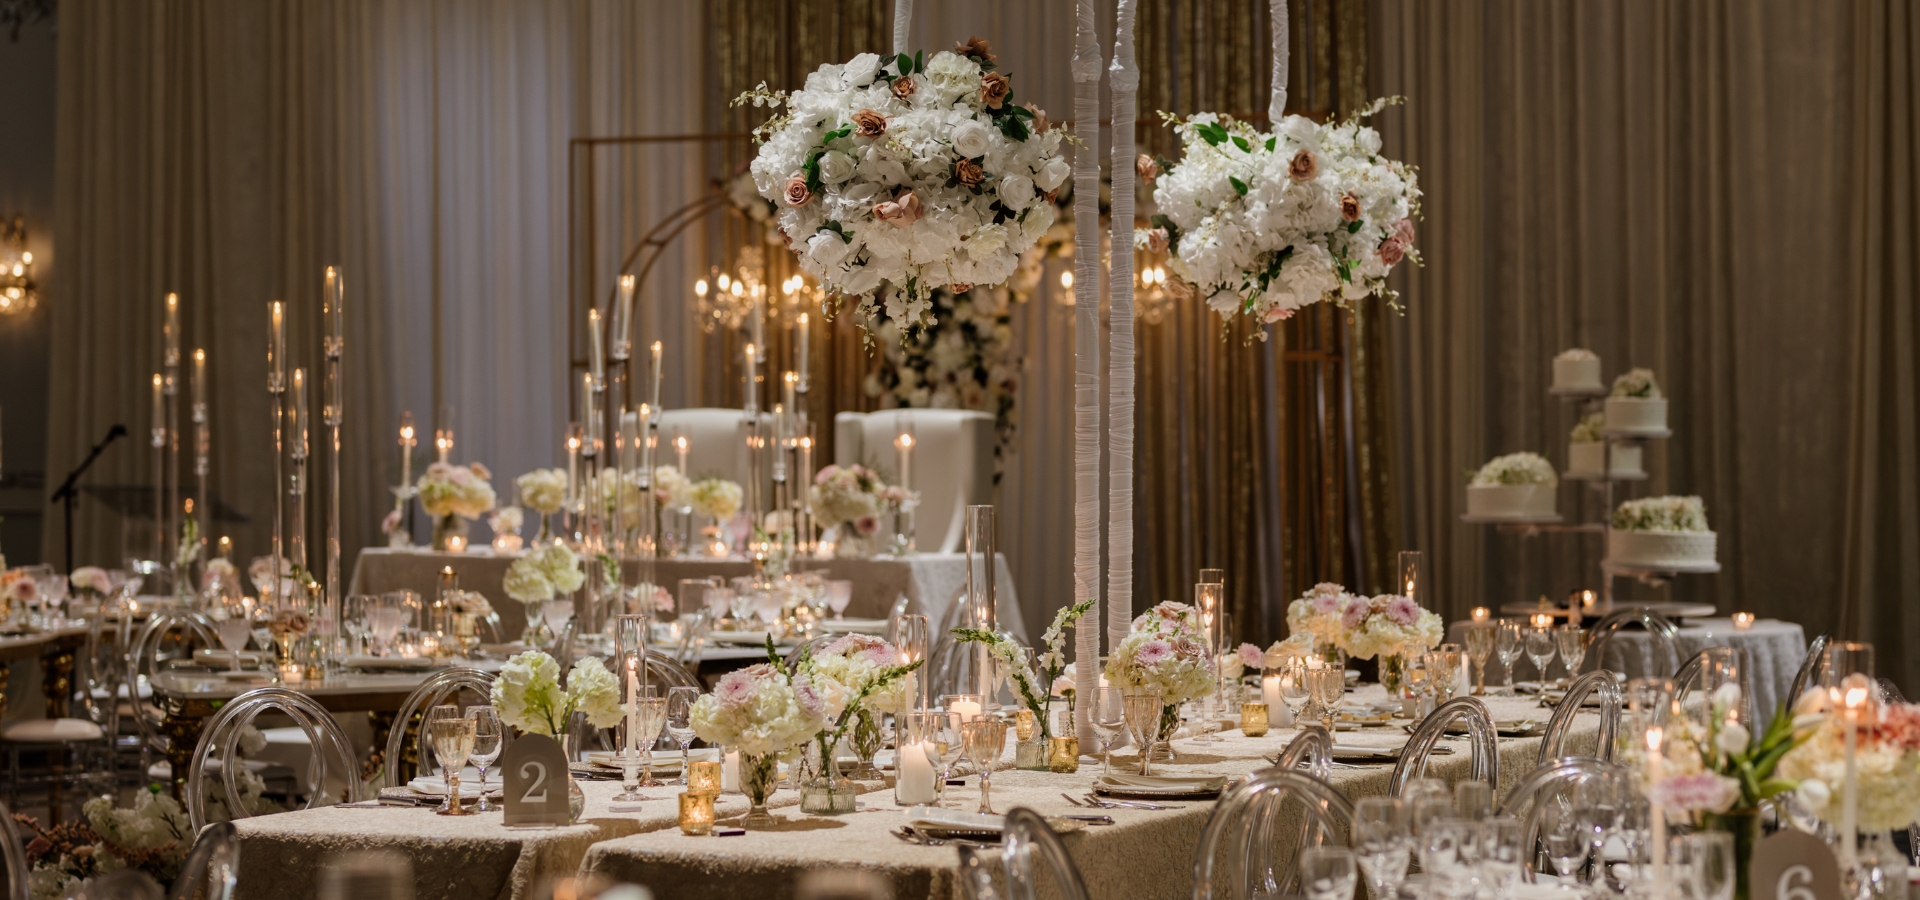 Hero image for Sofia and Salvador’s Luxurious Crystal and Floral Wedding at The Venetian Banquet Hall